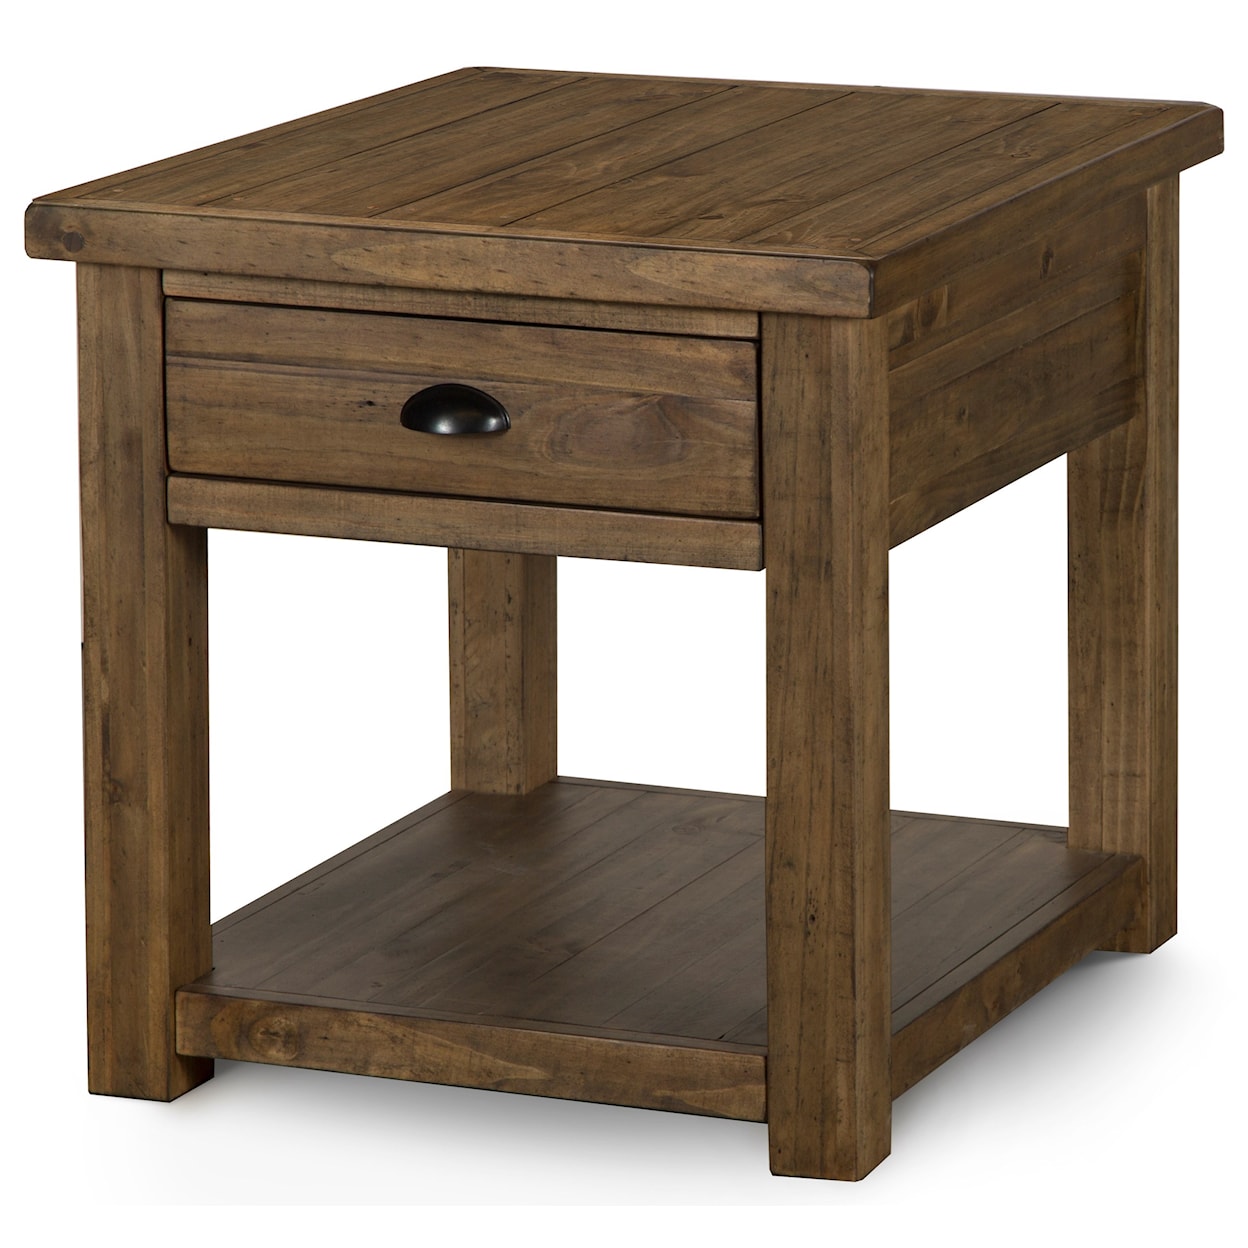 Magnussen Home Stratton Occasional Tables Rectangular End Table